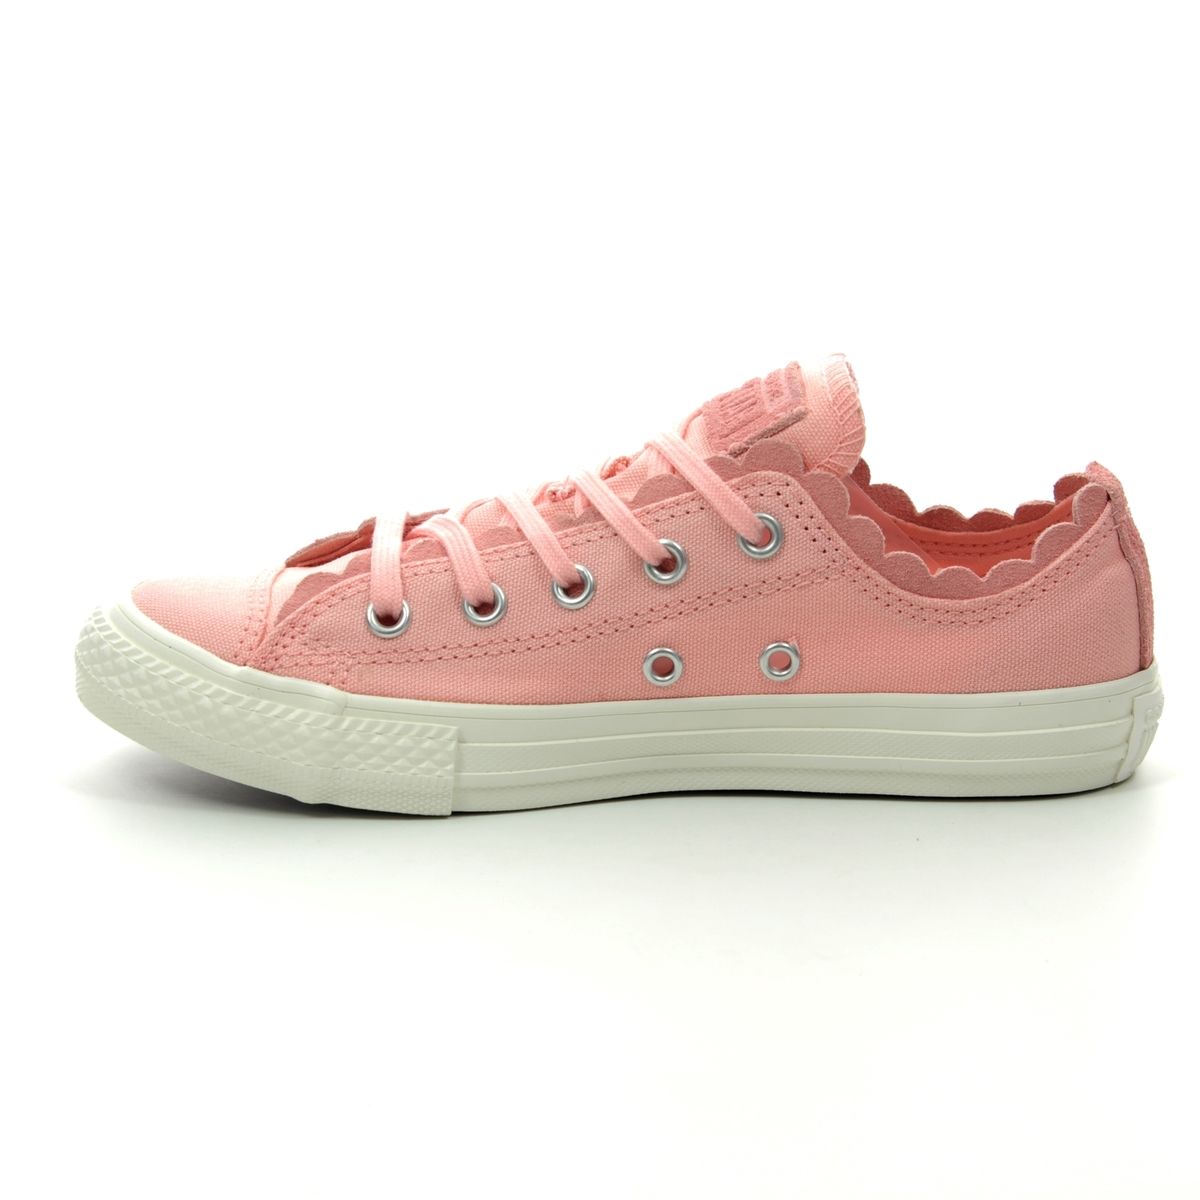 converse frilly frills